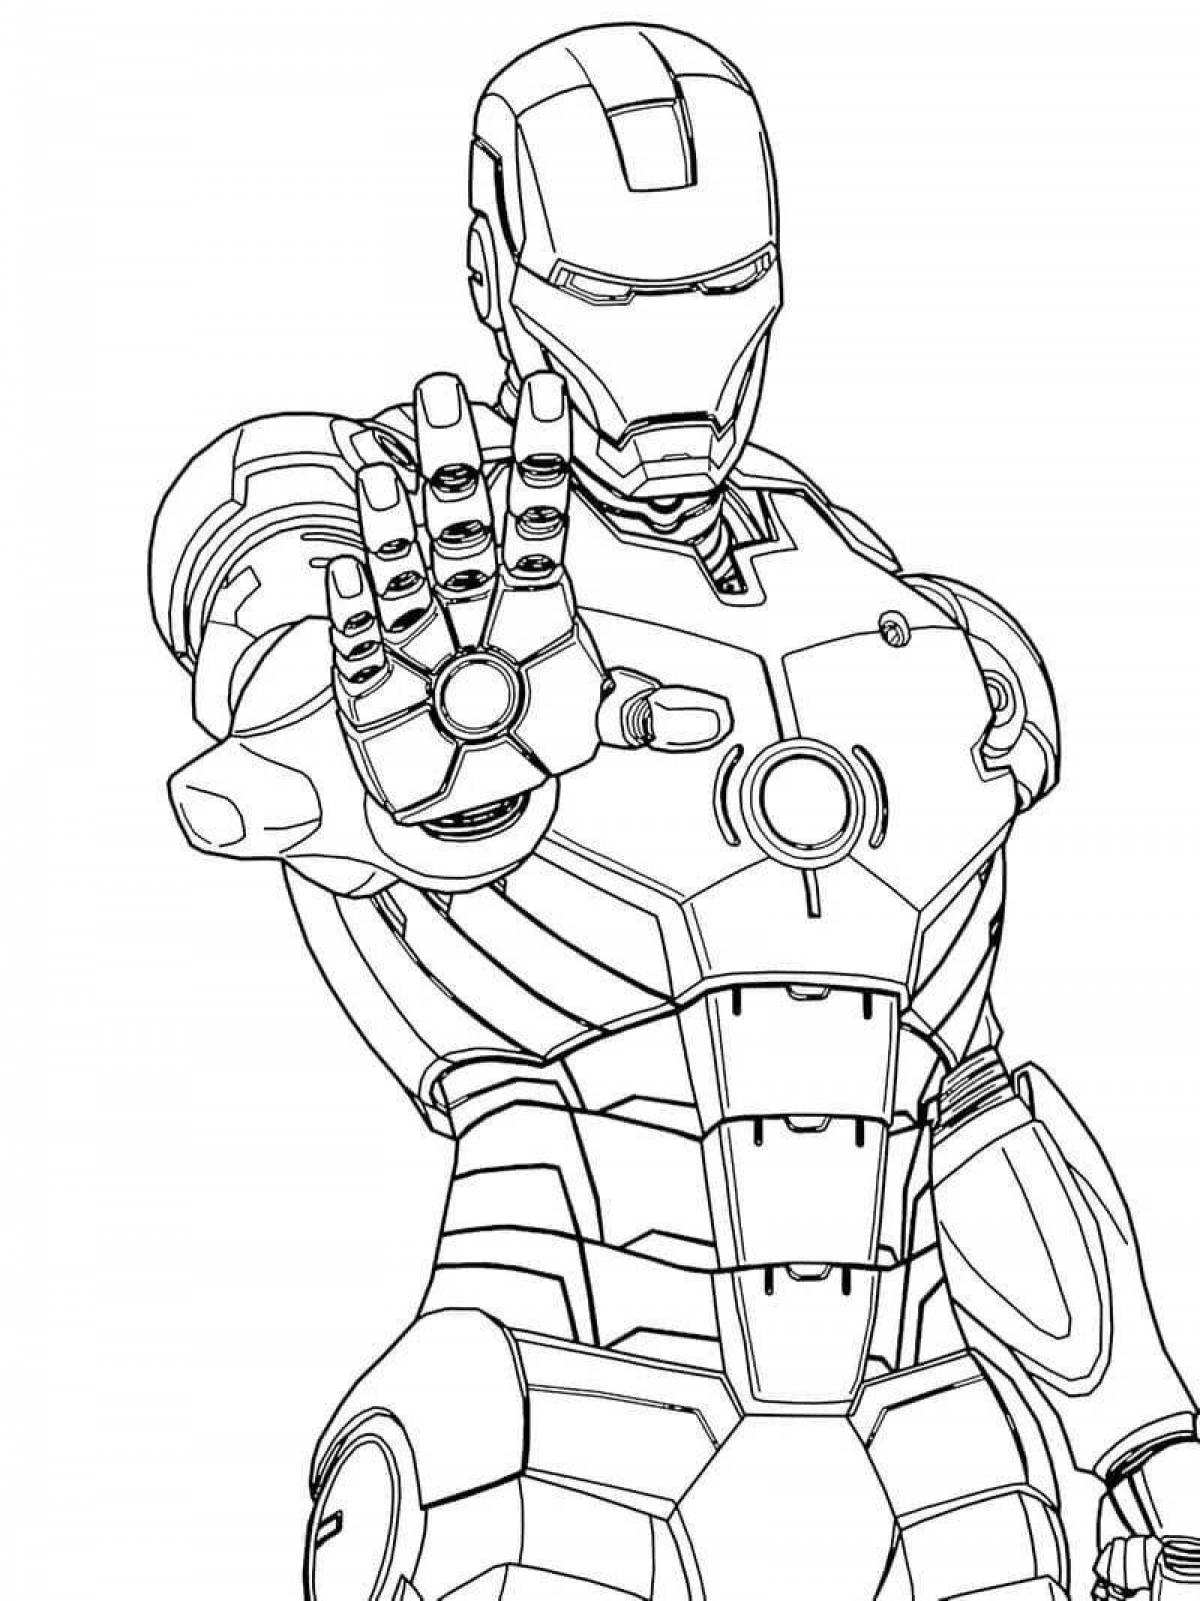 Luxury iron man coloring page